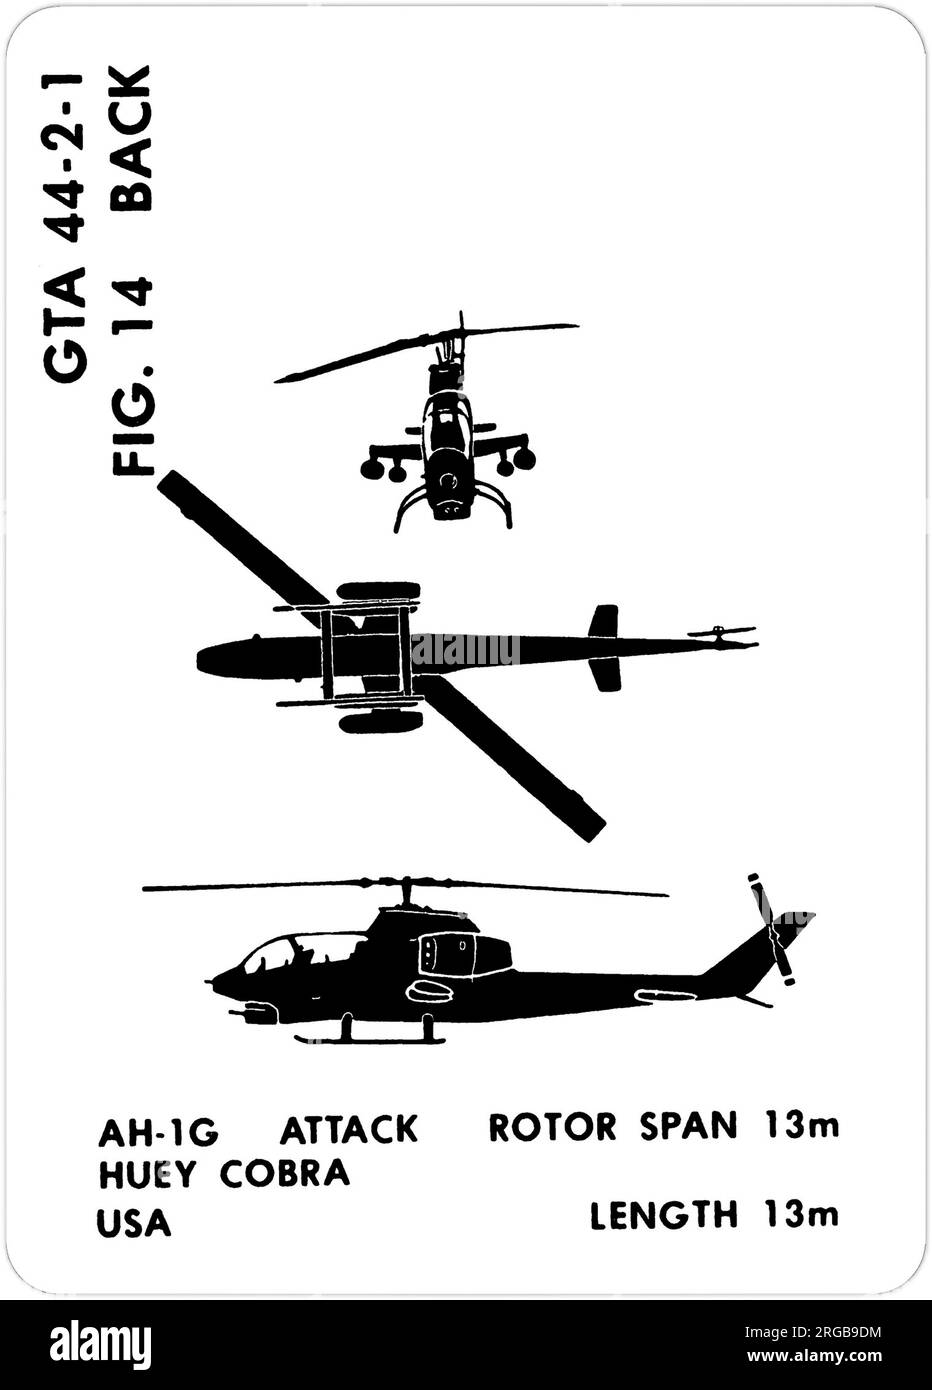 Bell AH-1G Cobra. This is one of the series of Graphics Training Aids (GTA) used by the United States Army to train their personnel to recognize friendly and hostile aircraft. This particular set, GTA 44-2-1, was issued in July1977. The set features aircraft from: Canada, Italy, United Kingdom, United States, and the USSR. Stock Photo